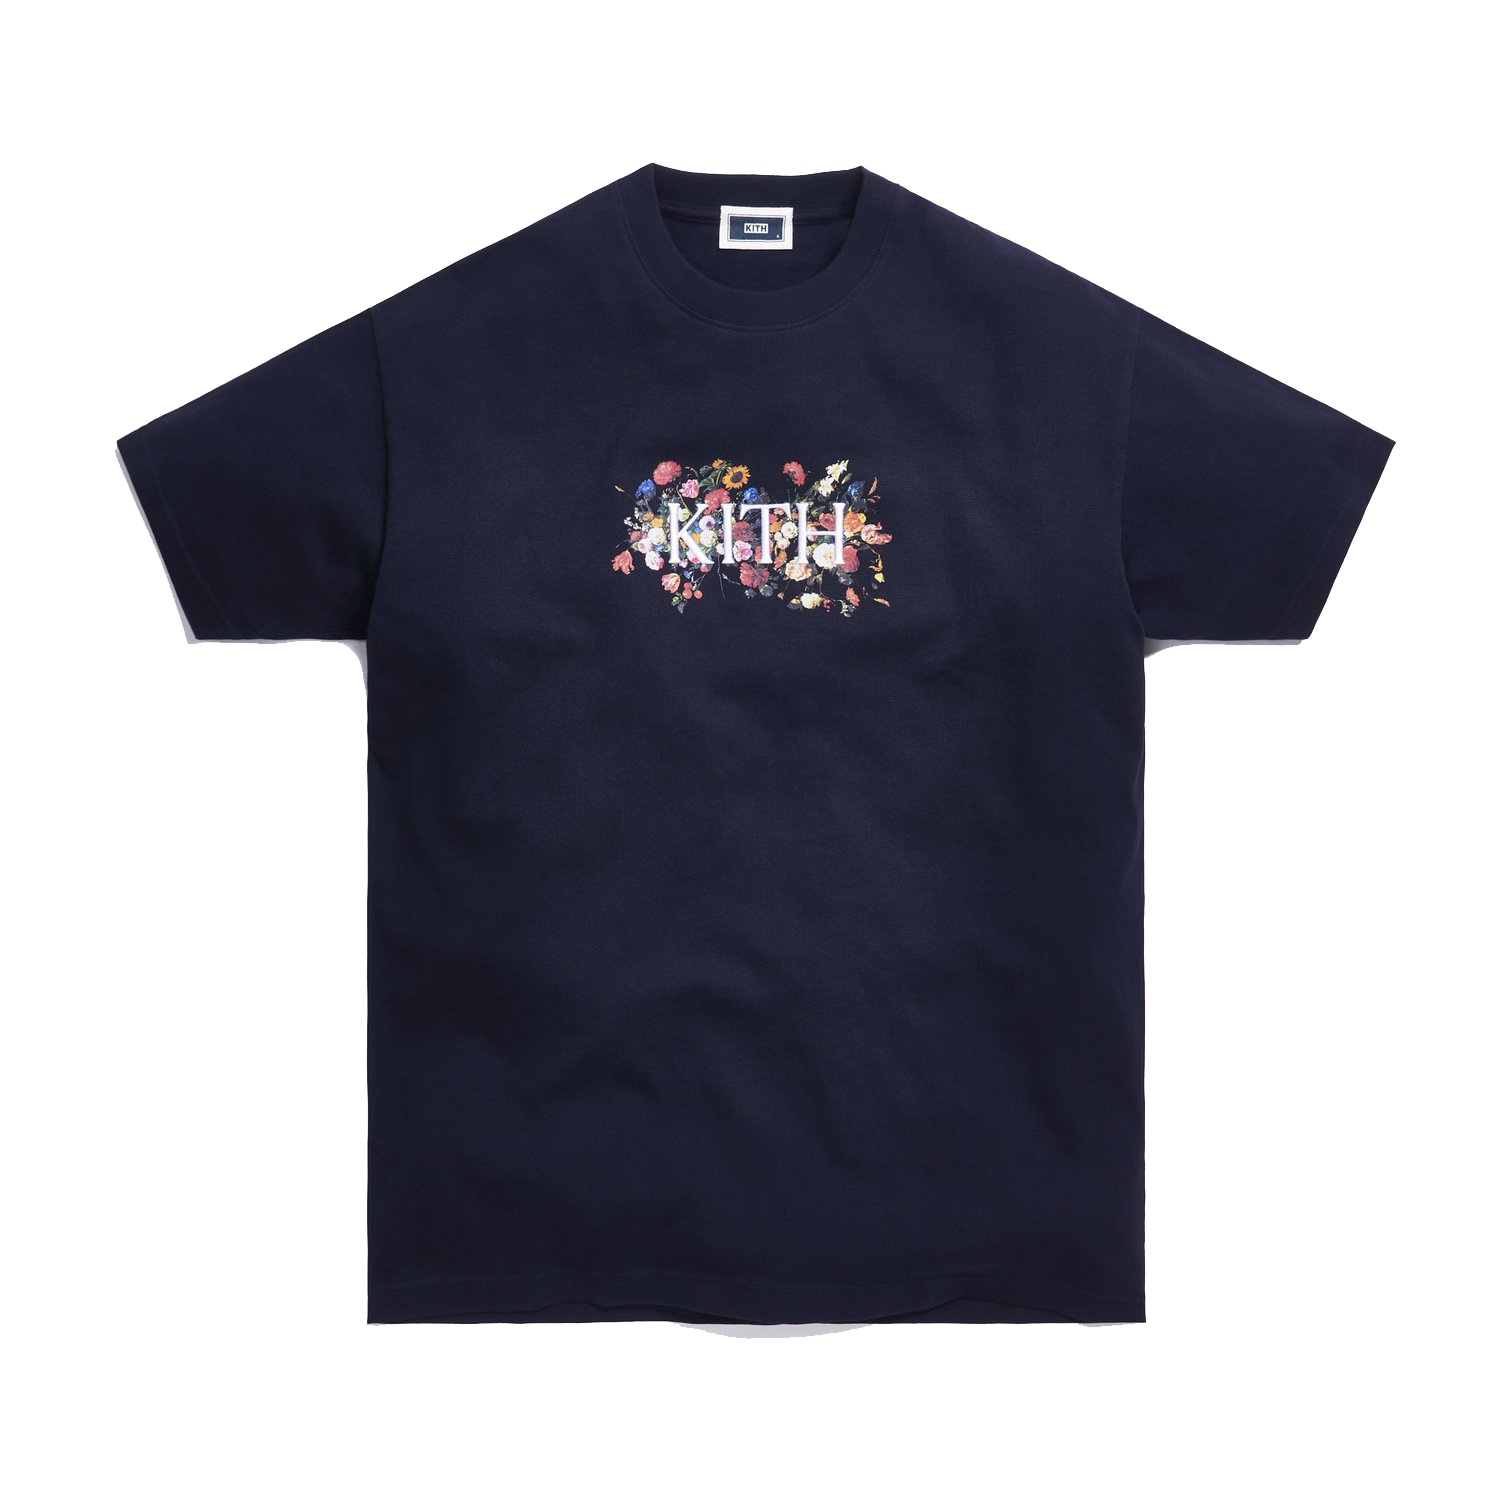 KITH GARDENS OF THE MIND Tシャツ